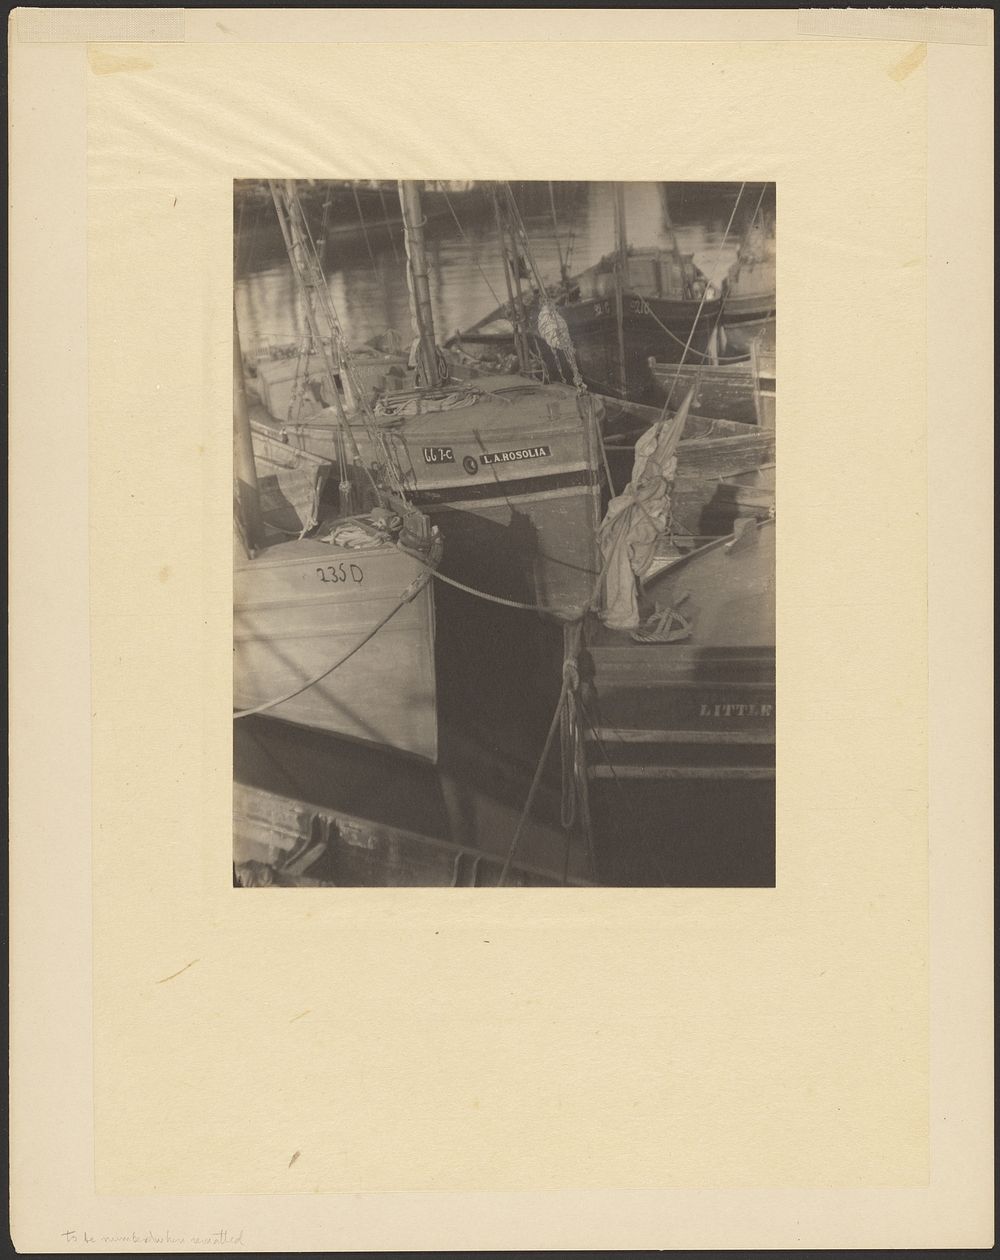 Harbor, Crowded with Sail-Masted Fishing Vessels by Doris Ulmann